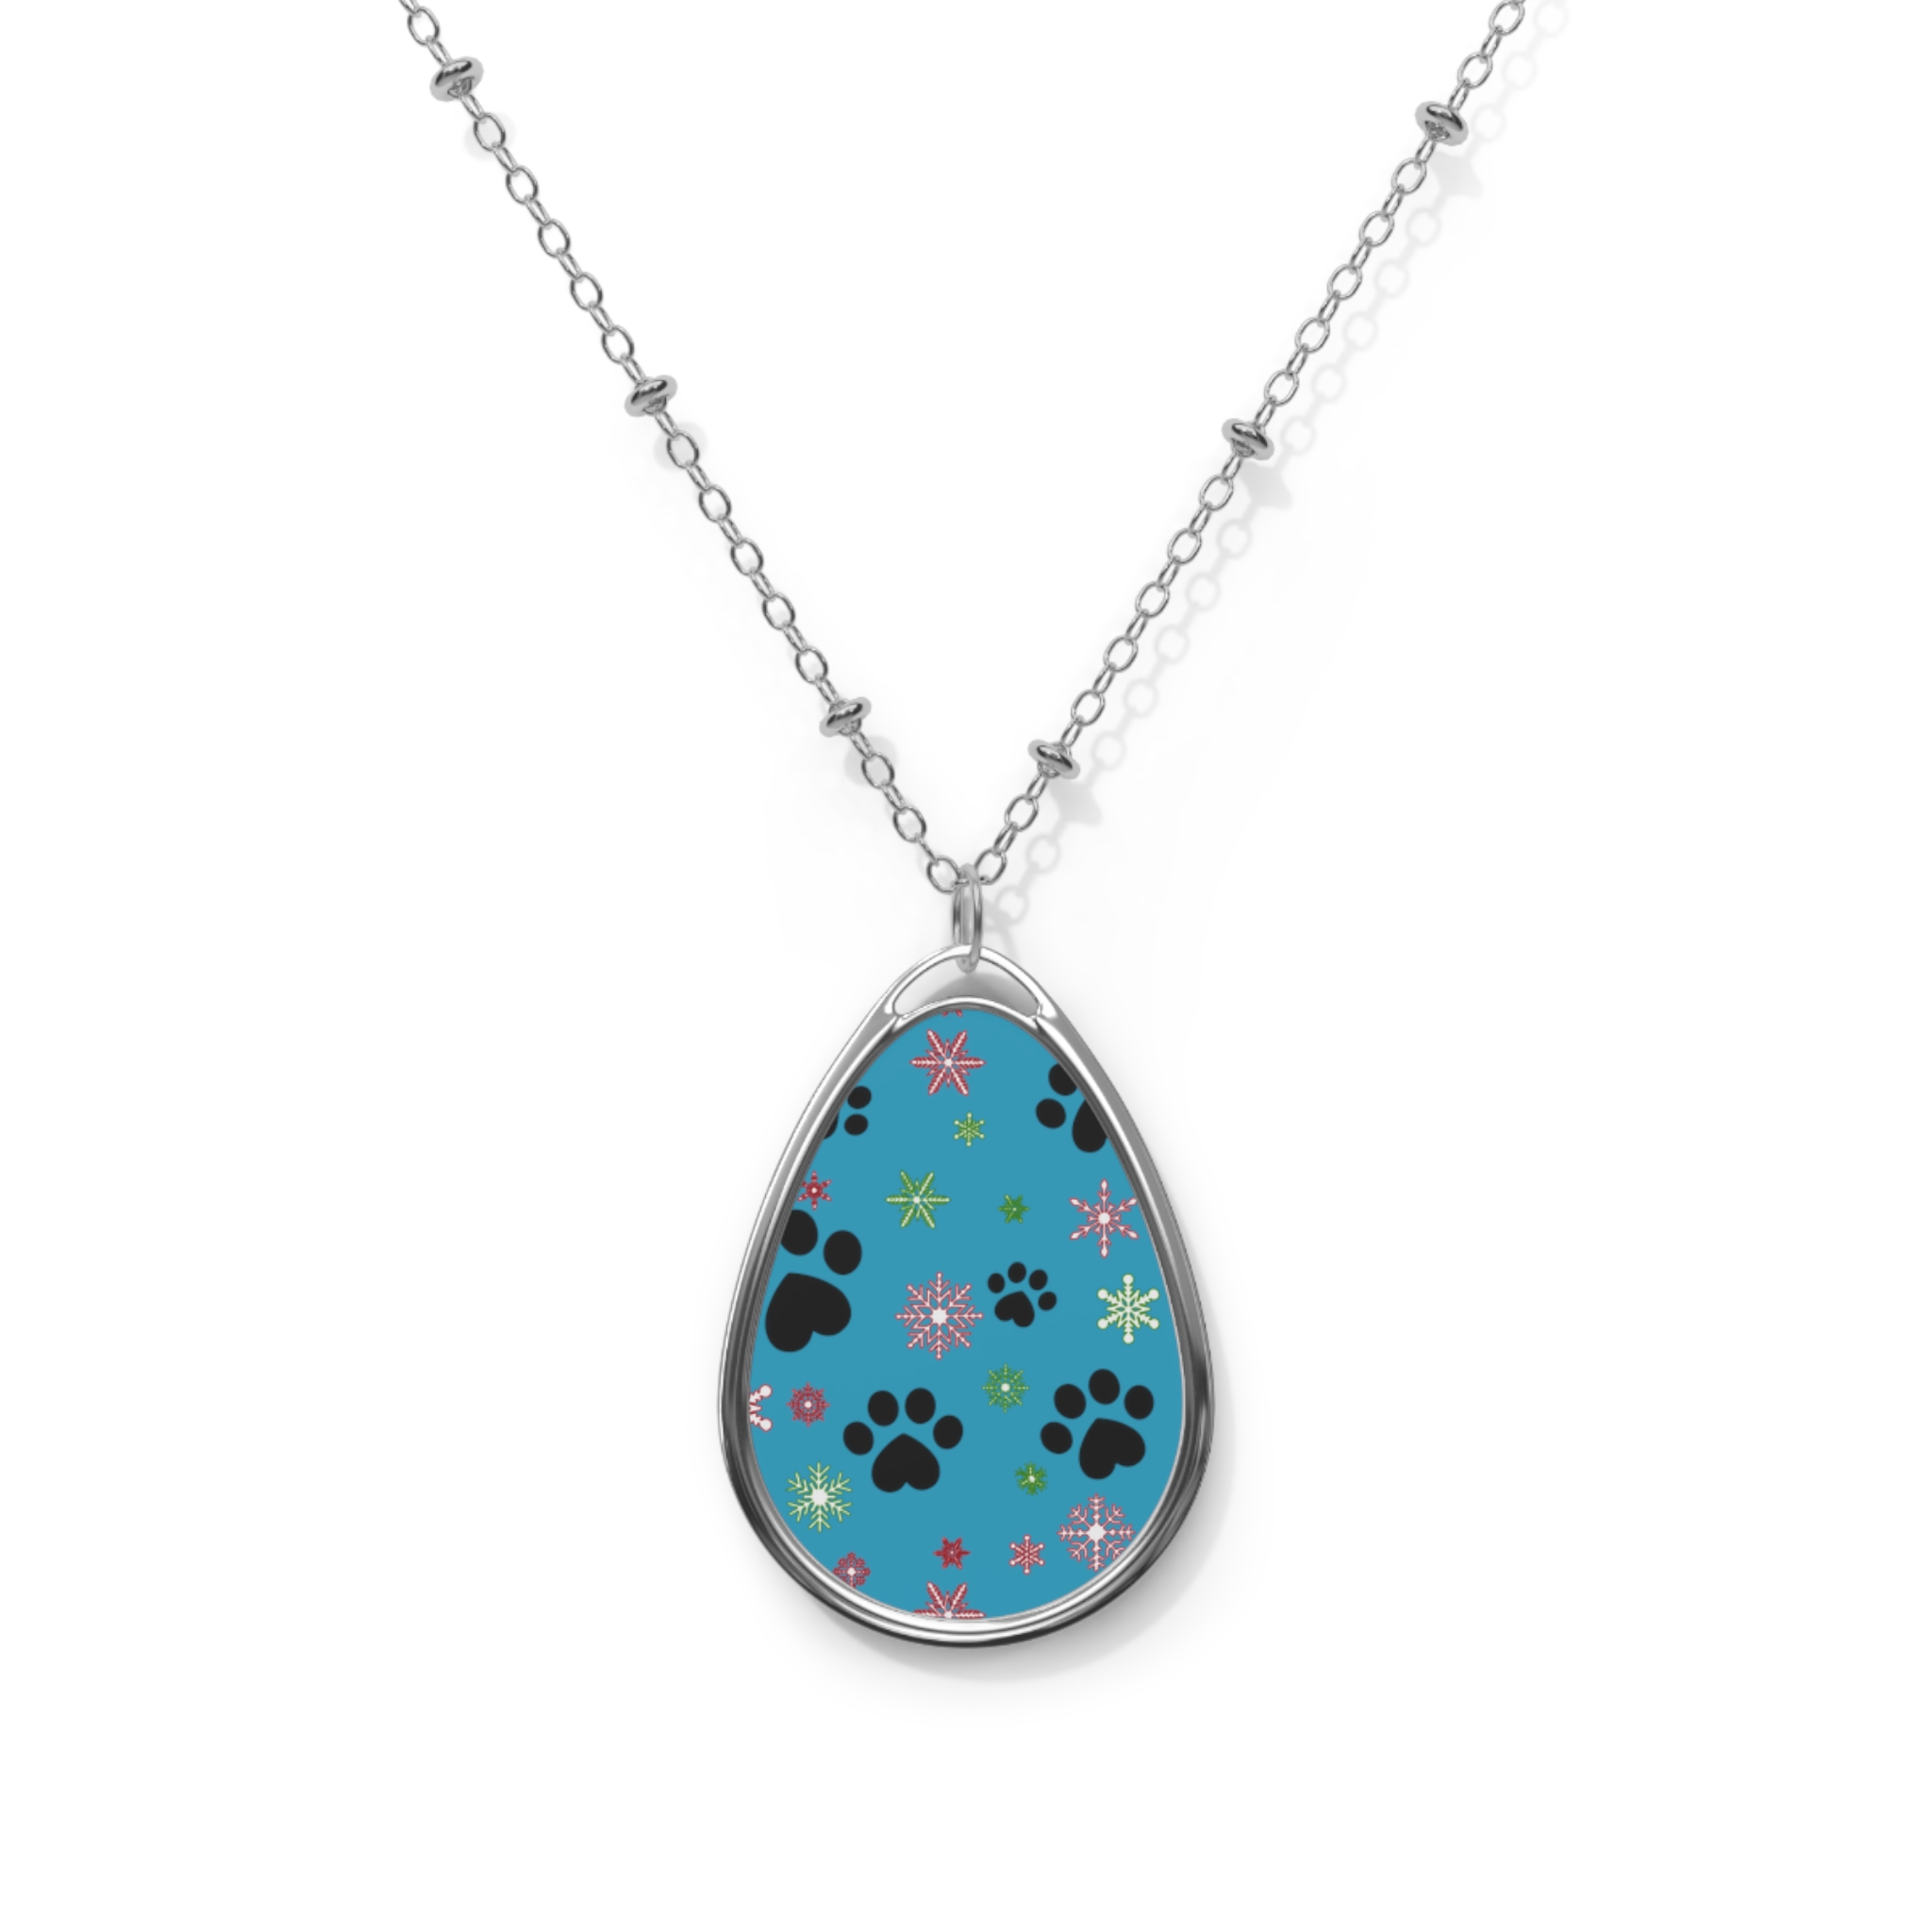 Oval Necklace- Paws & Snowflakes